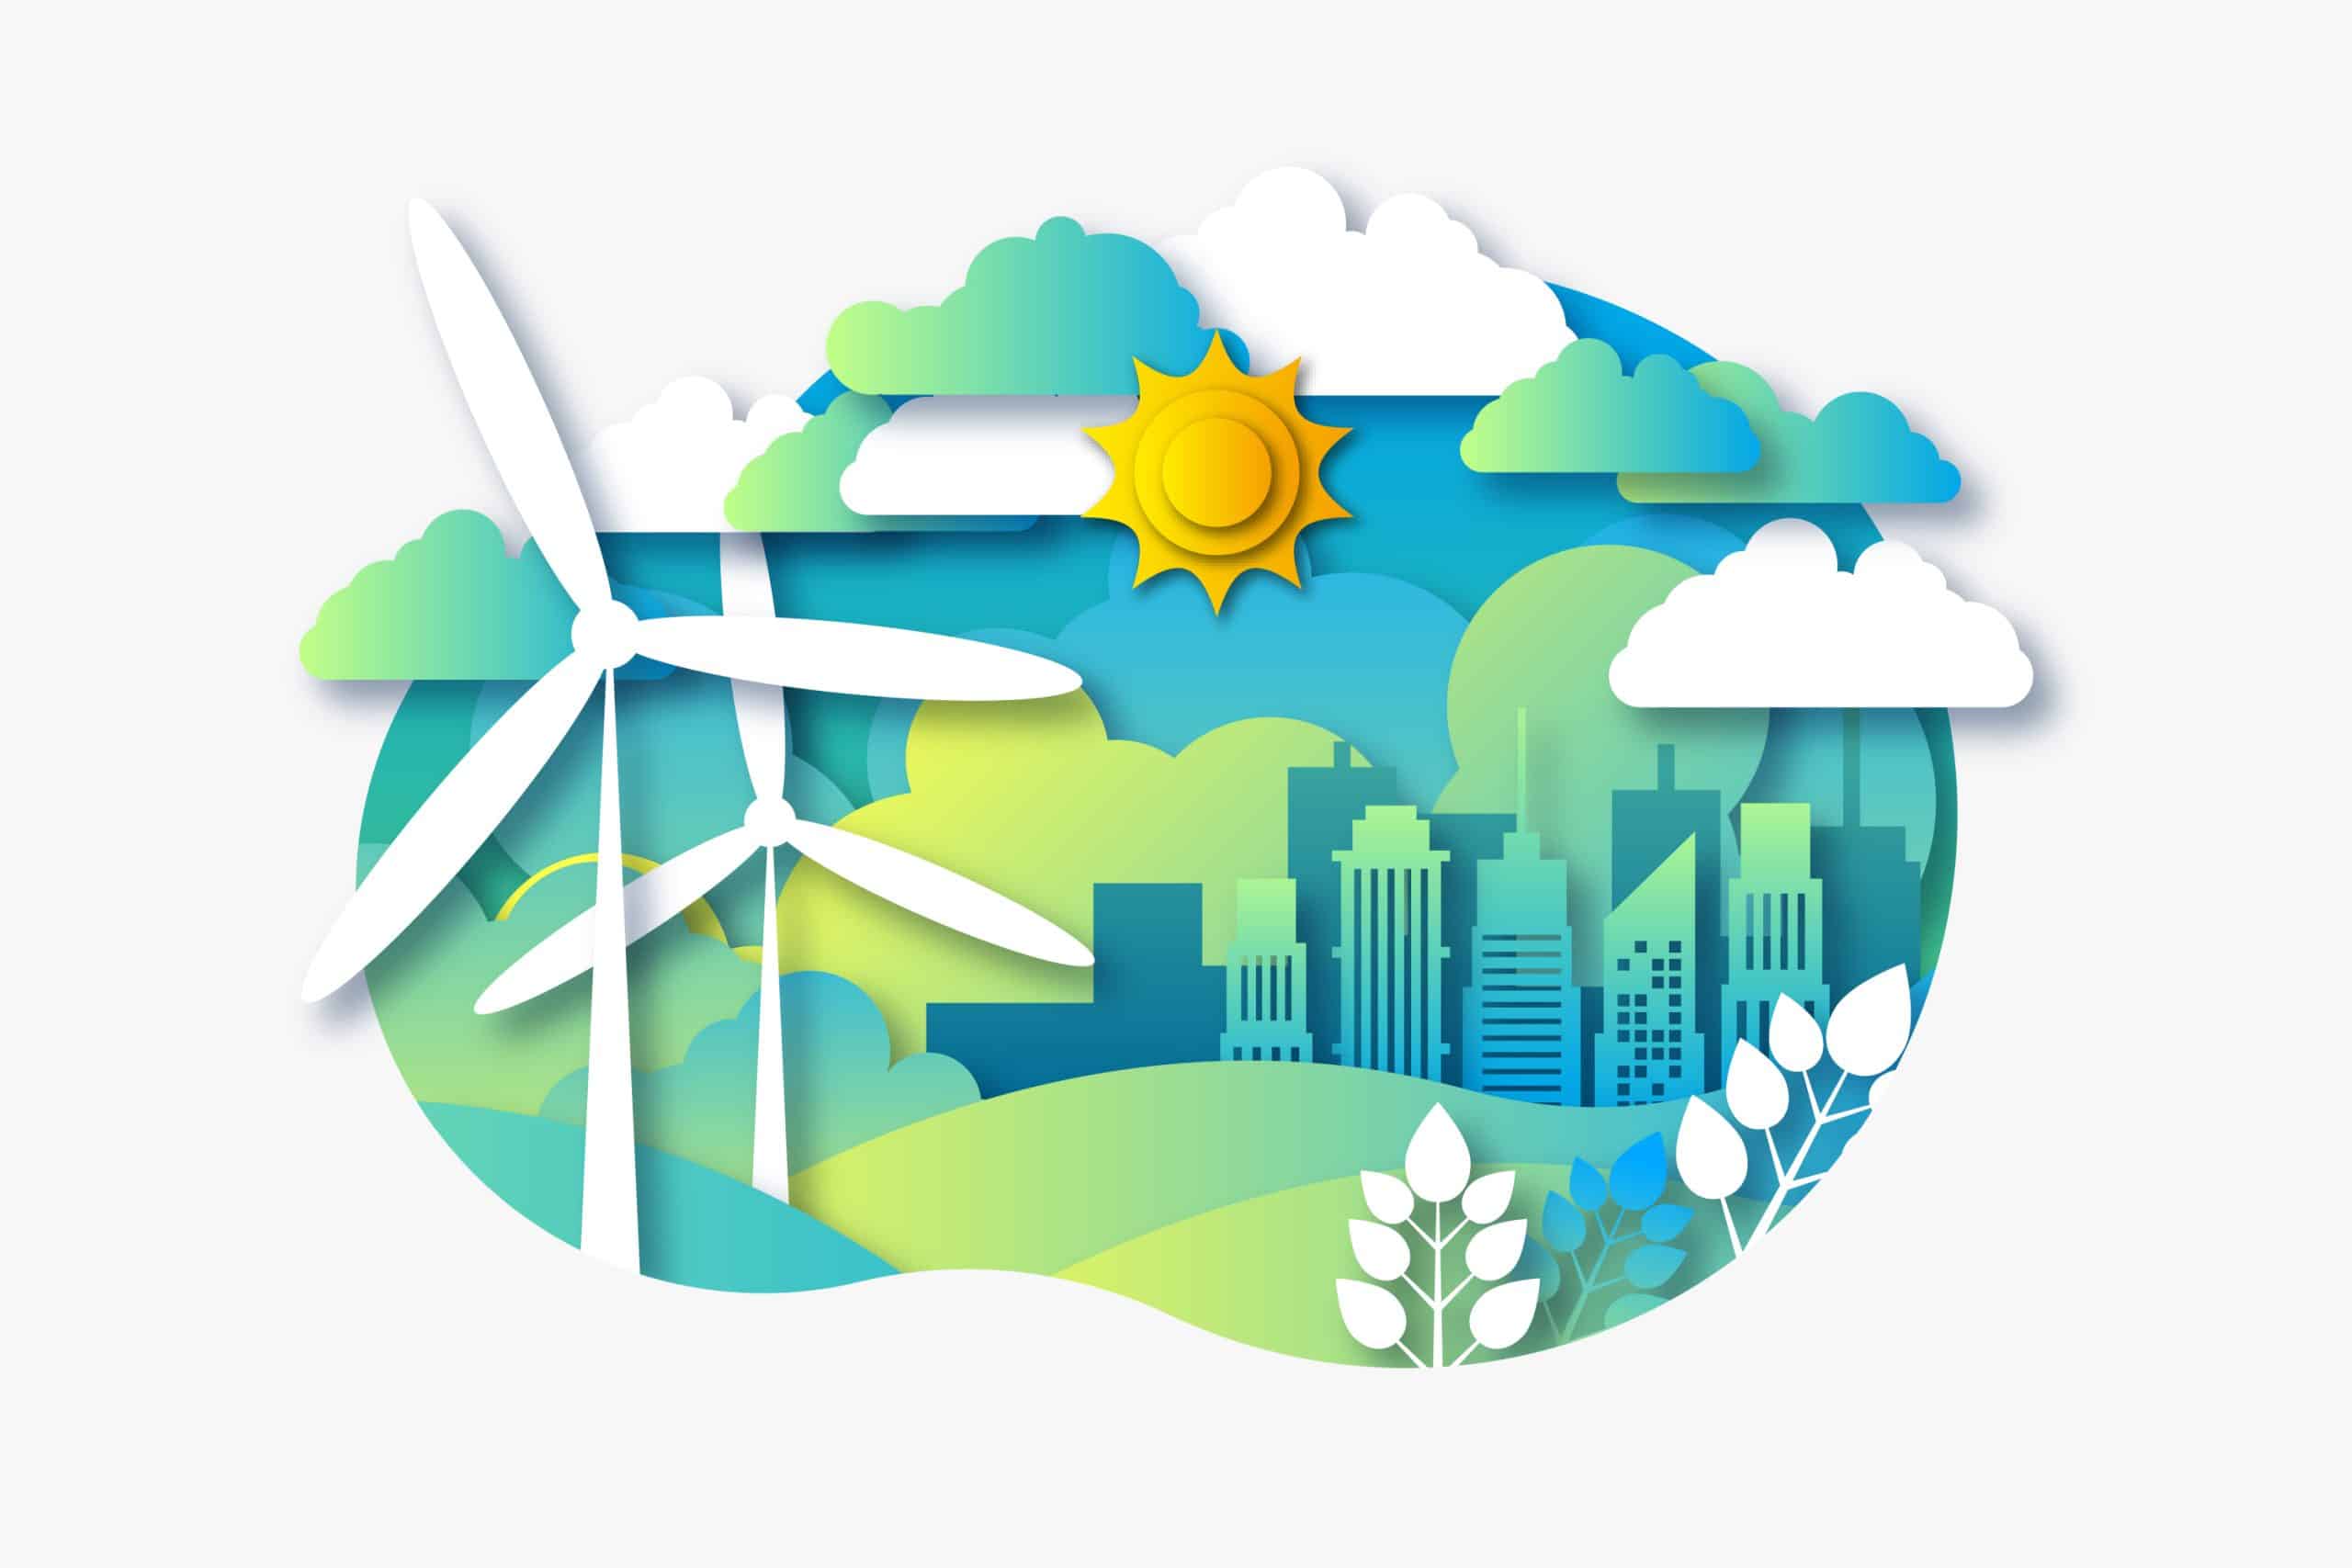 The image displays a colorful, paper-cut style artwork featuring renewable energy sources like wind turbines against an urban skyline with nature elements, depicting a sustainable environment.